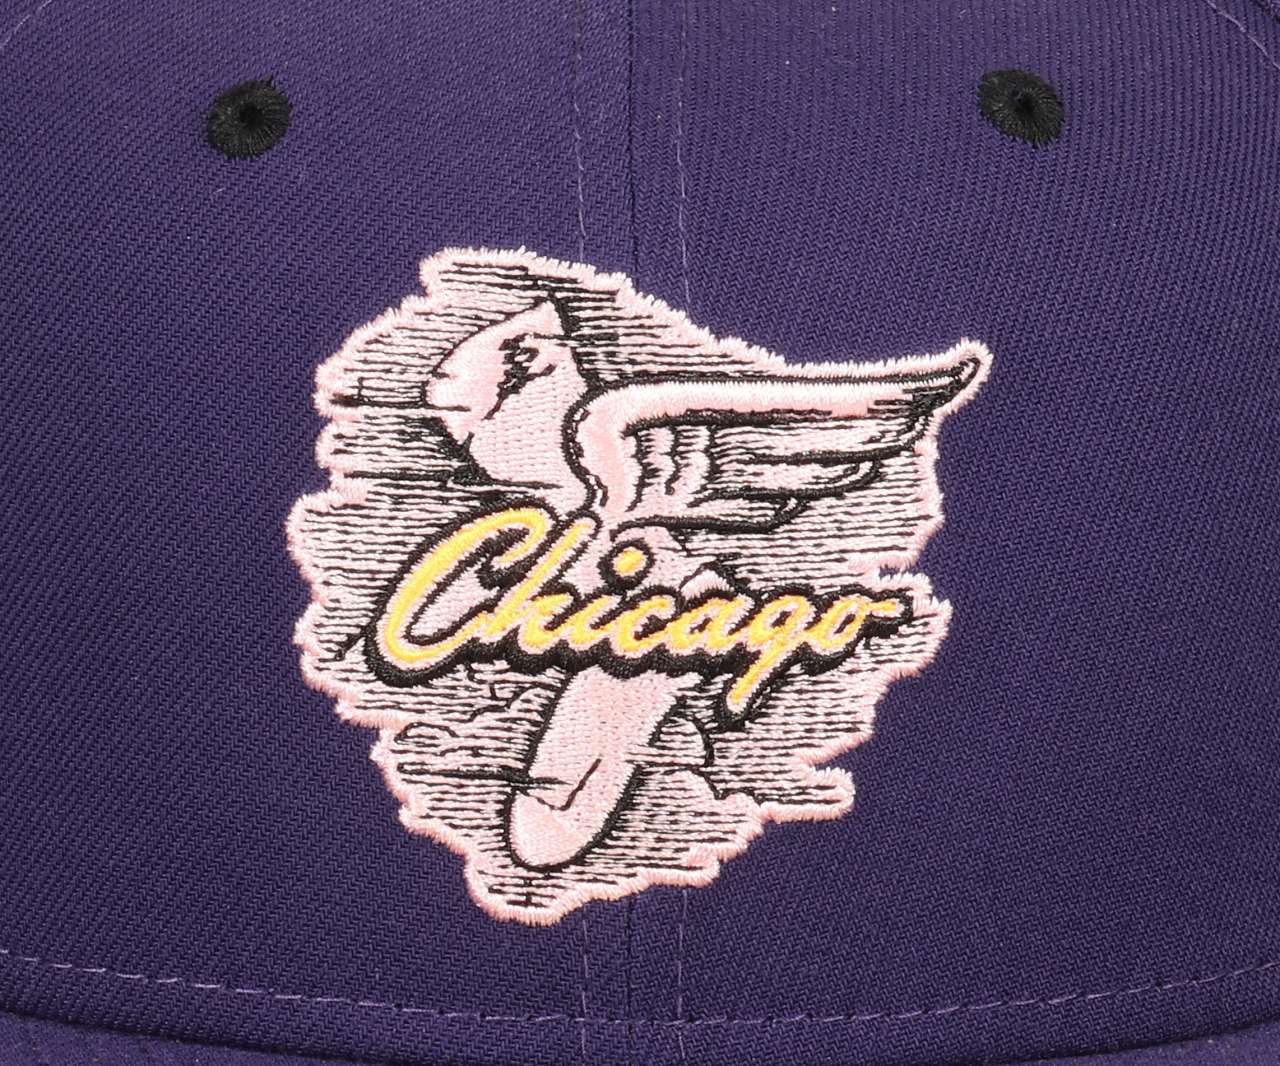 Chicago White Sox MLB All-Star Game 1950 Sidepatch Purple 59Fifty Basecap New Era